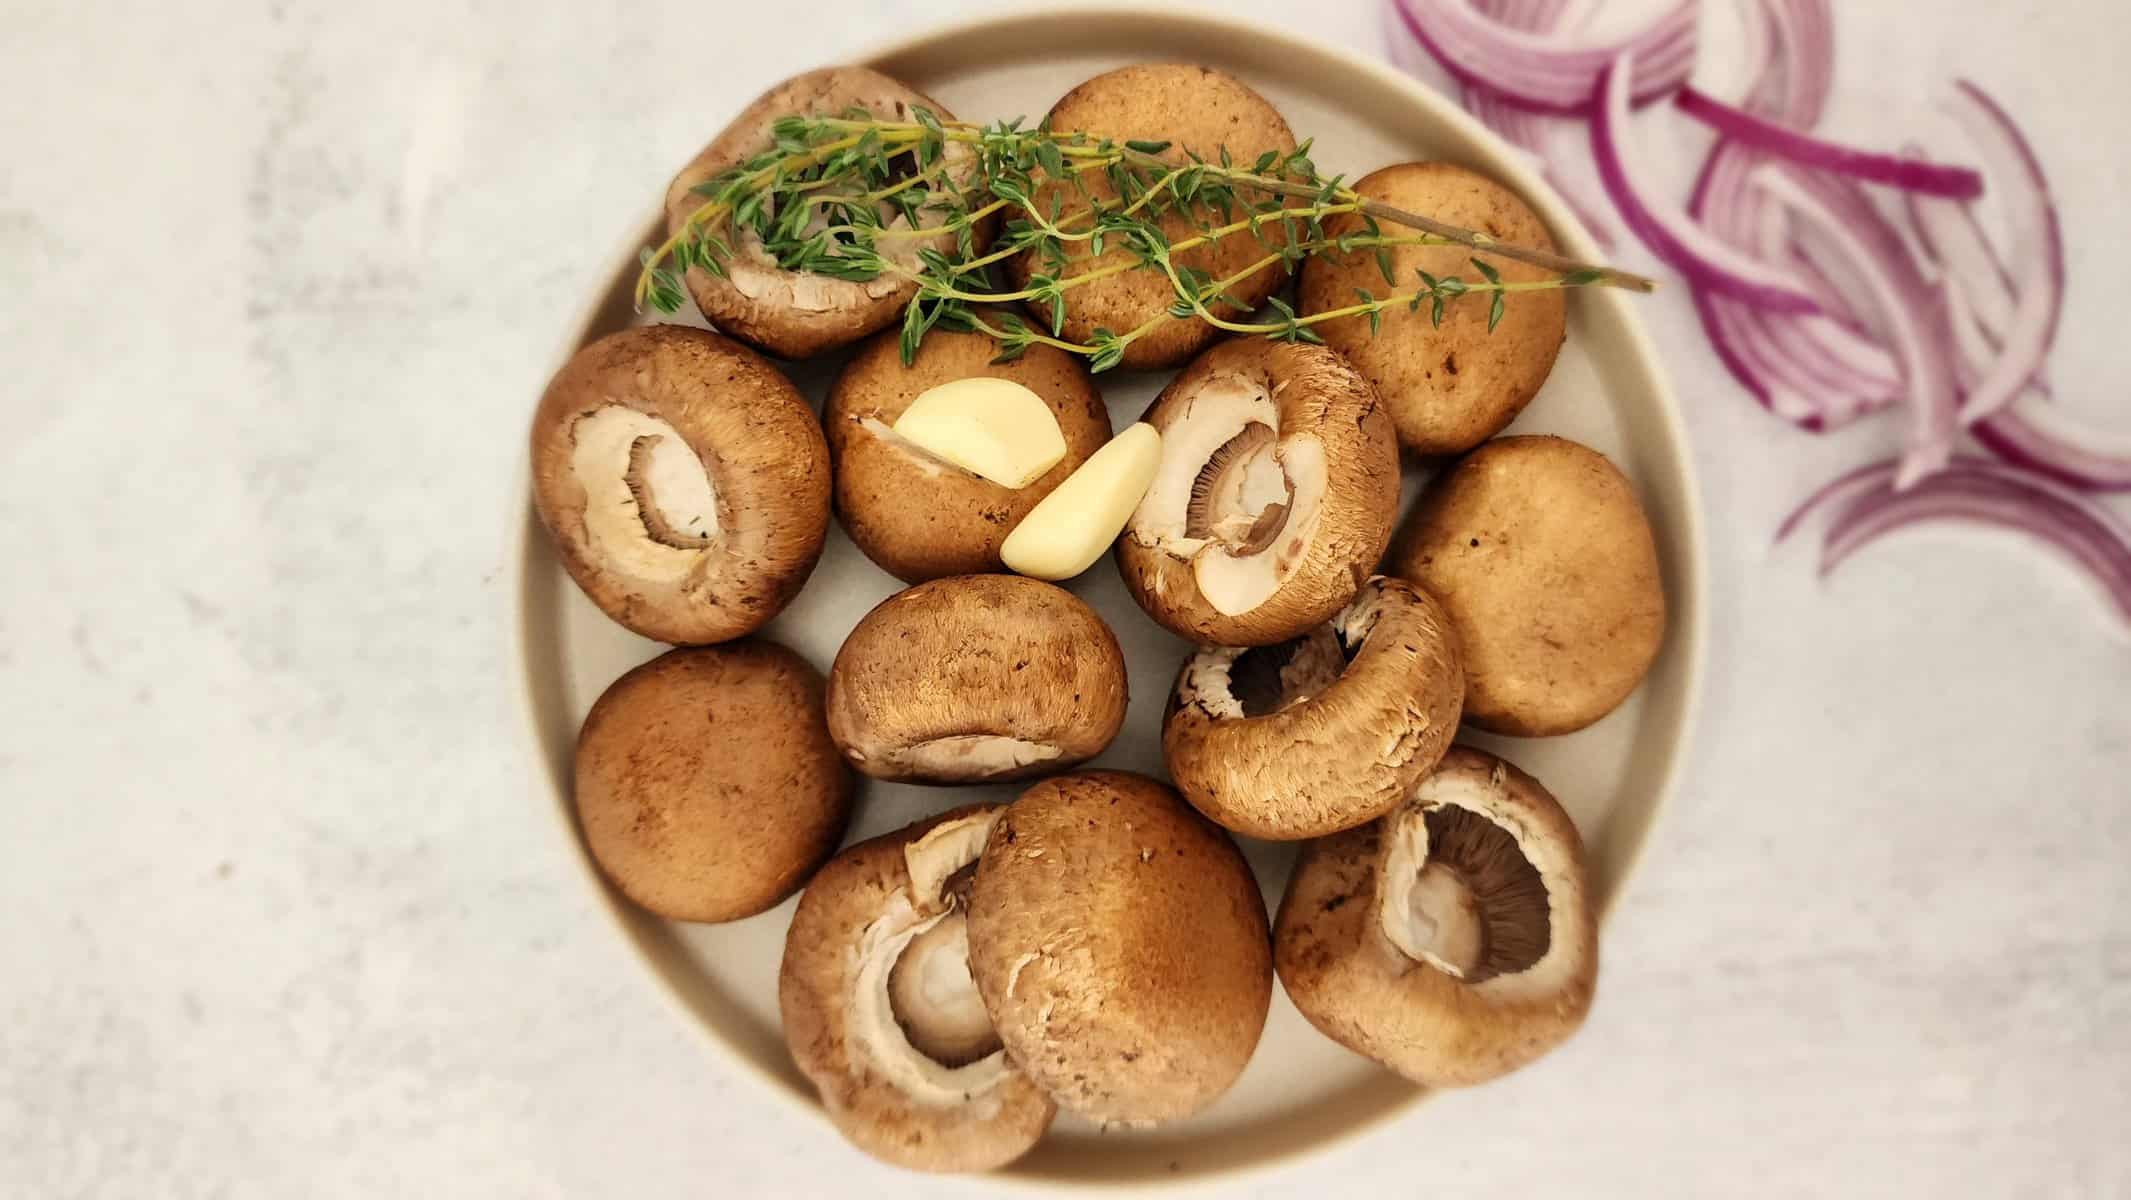 ingredients for marinated mushrooms - mushrooms, thyme, red onion